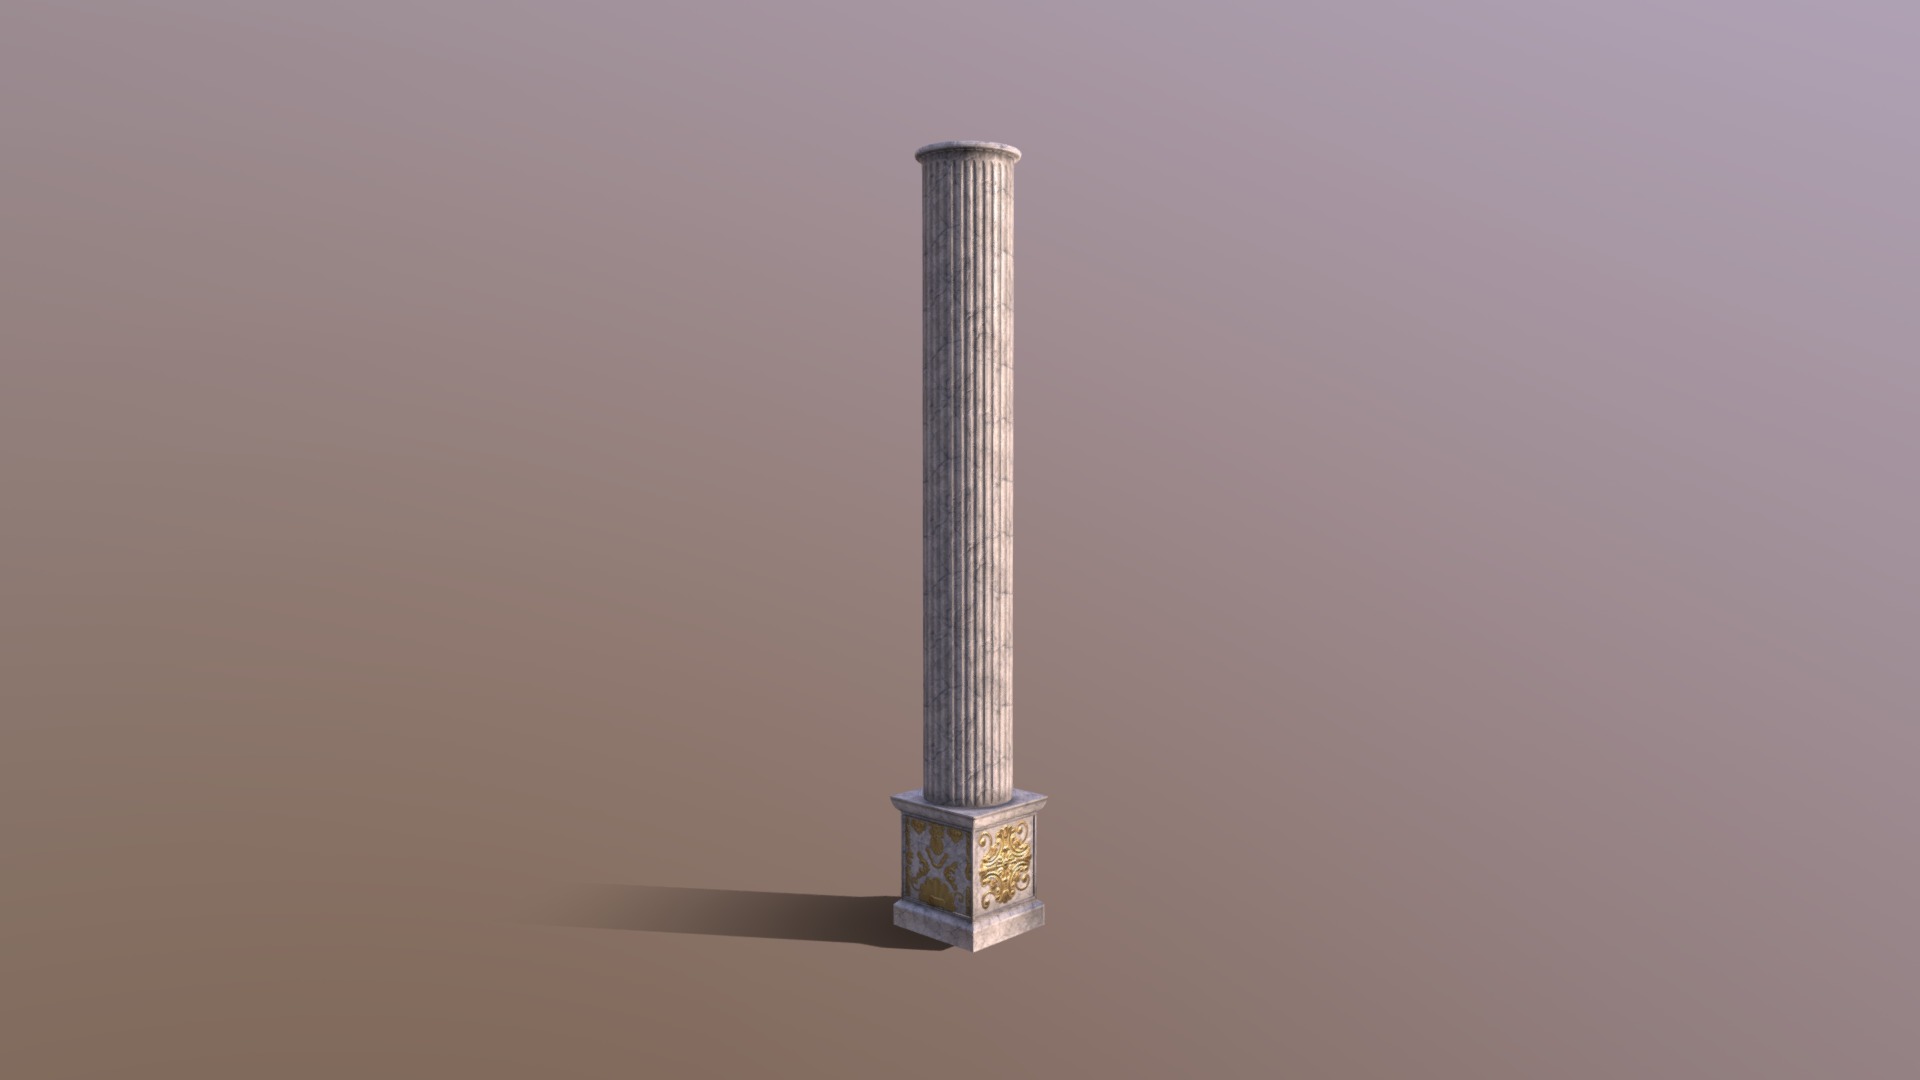 3D model Greek Piller (dmc 1 inspired) - This is a 3D model of the Greek Piller (dmc 1 inspired). The 3D model is about a cylindrical object with a metal base.